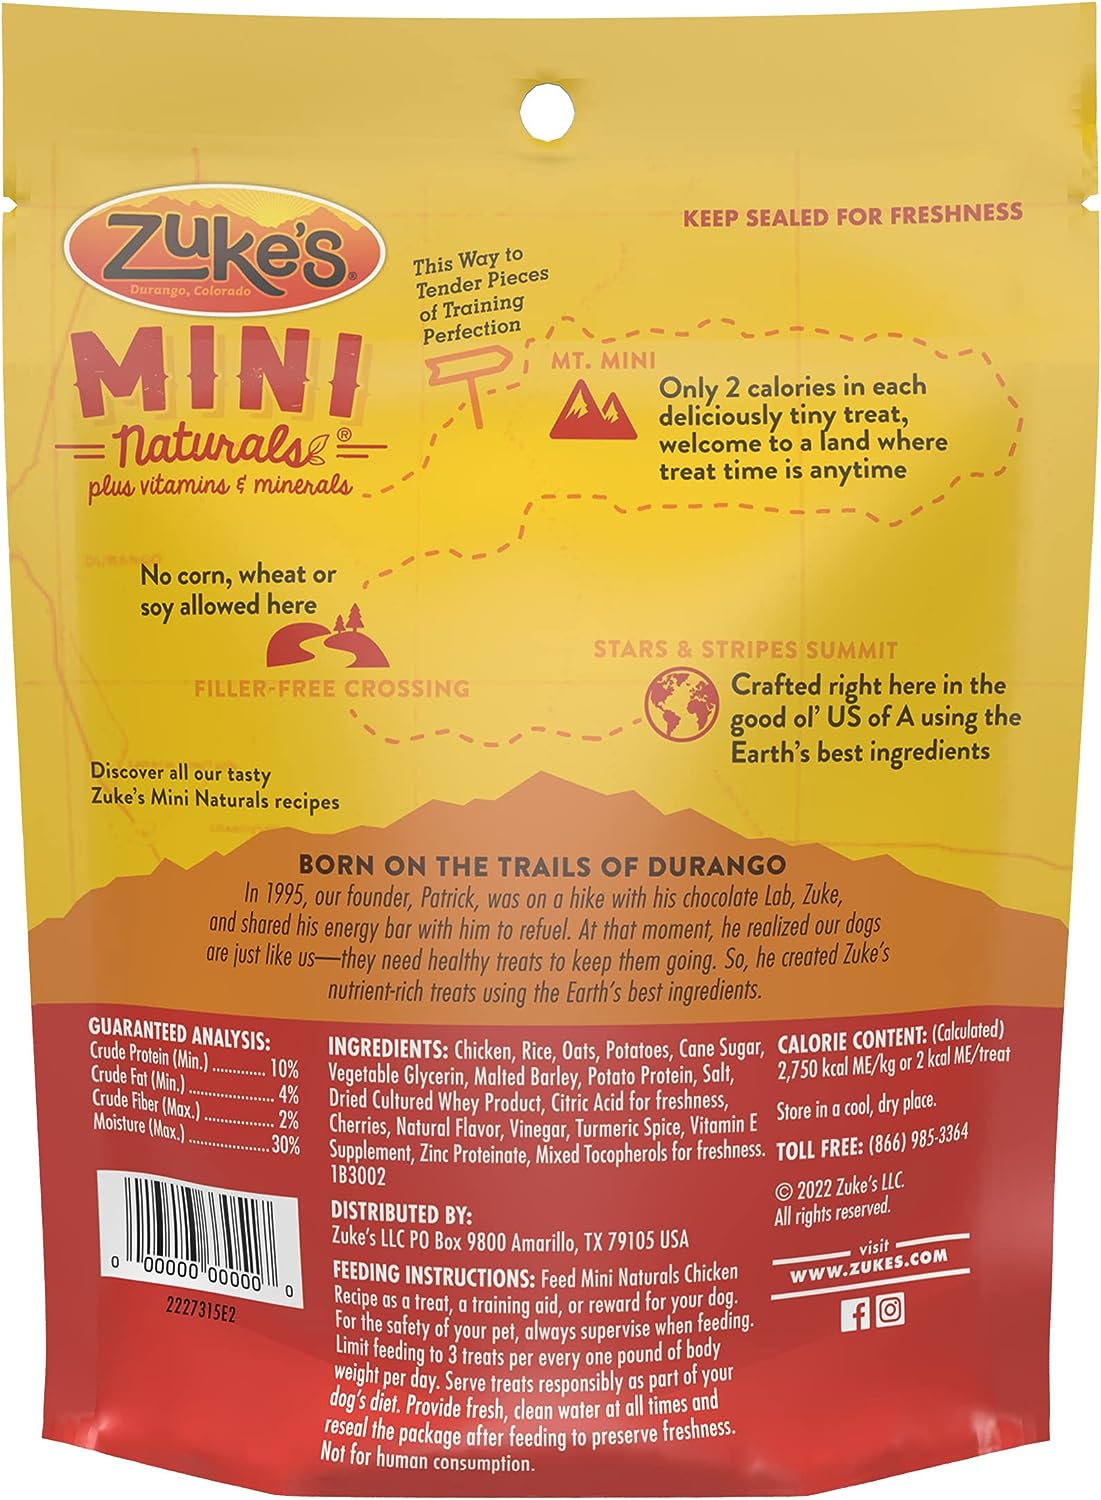 Zuke's Mini Naturals - Soft Chicken - Training Treats - #1 Recommended for puppies!